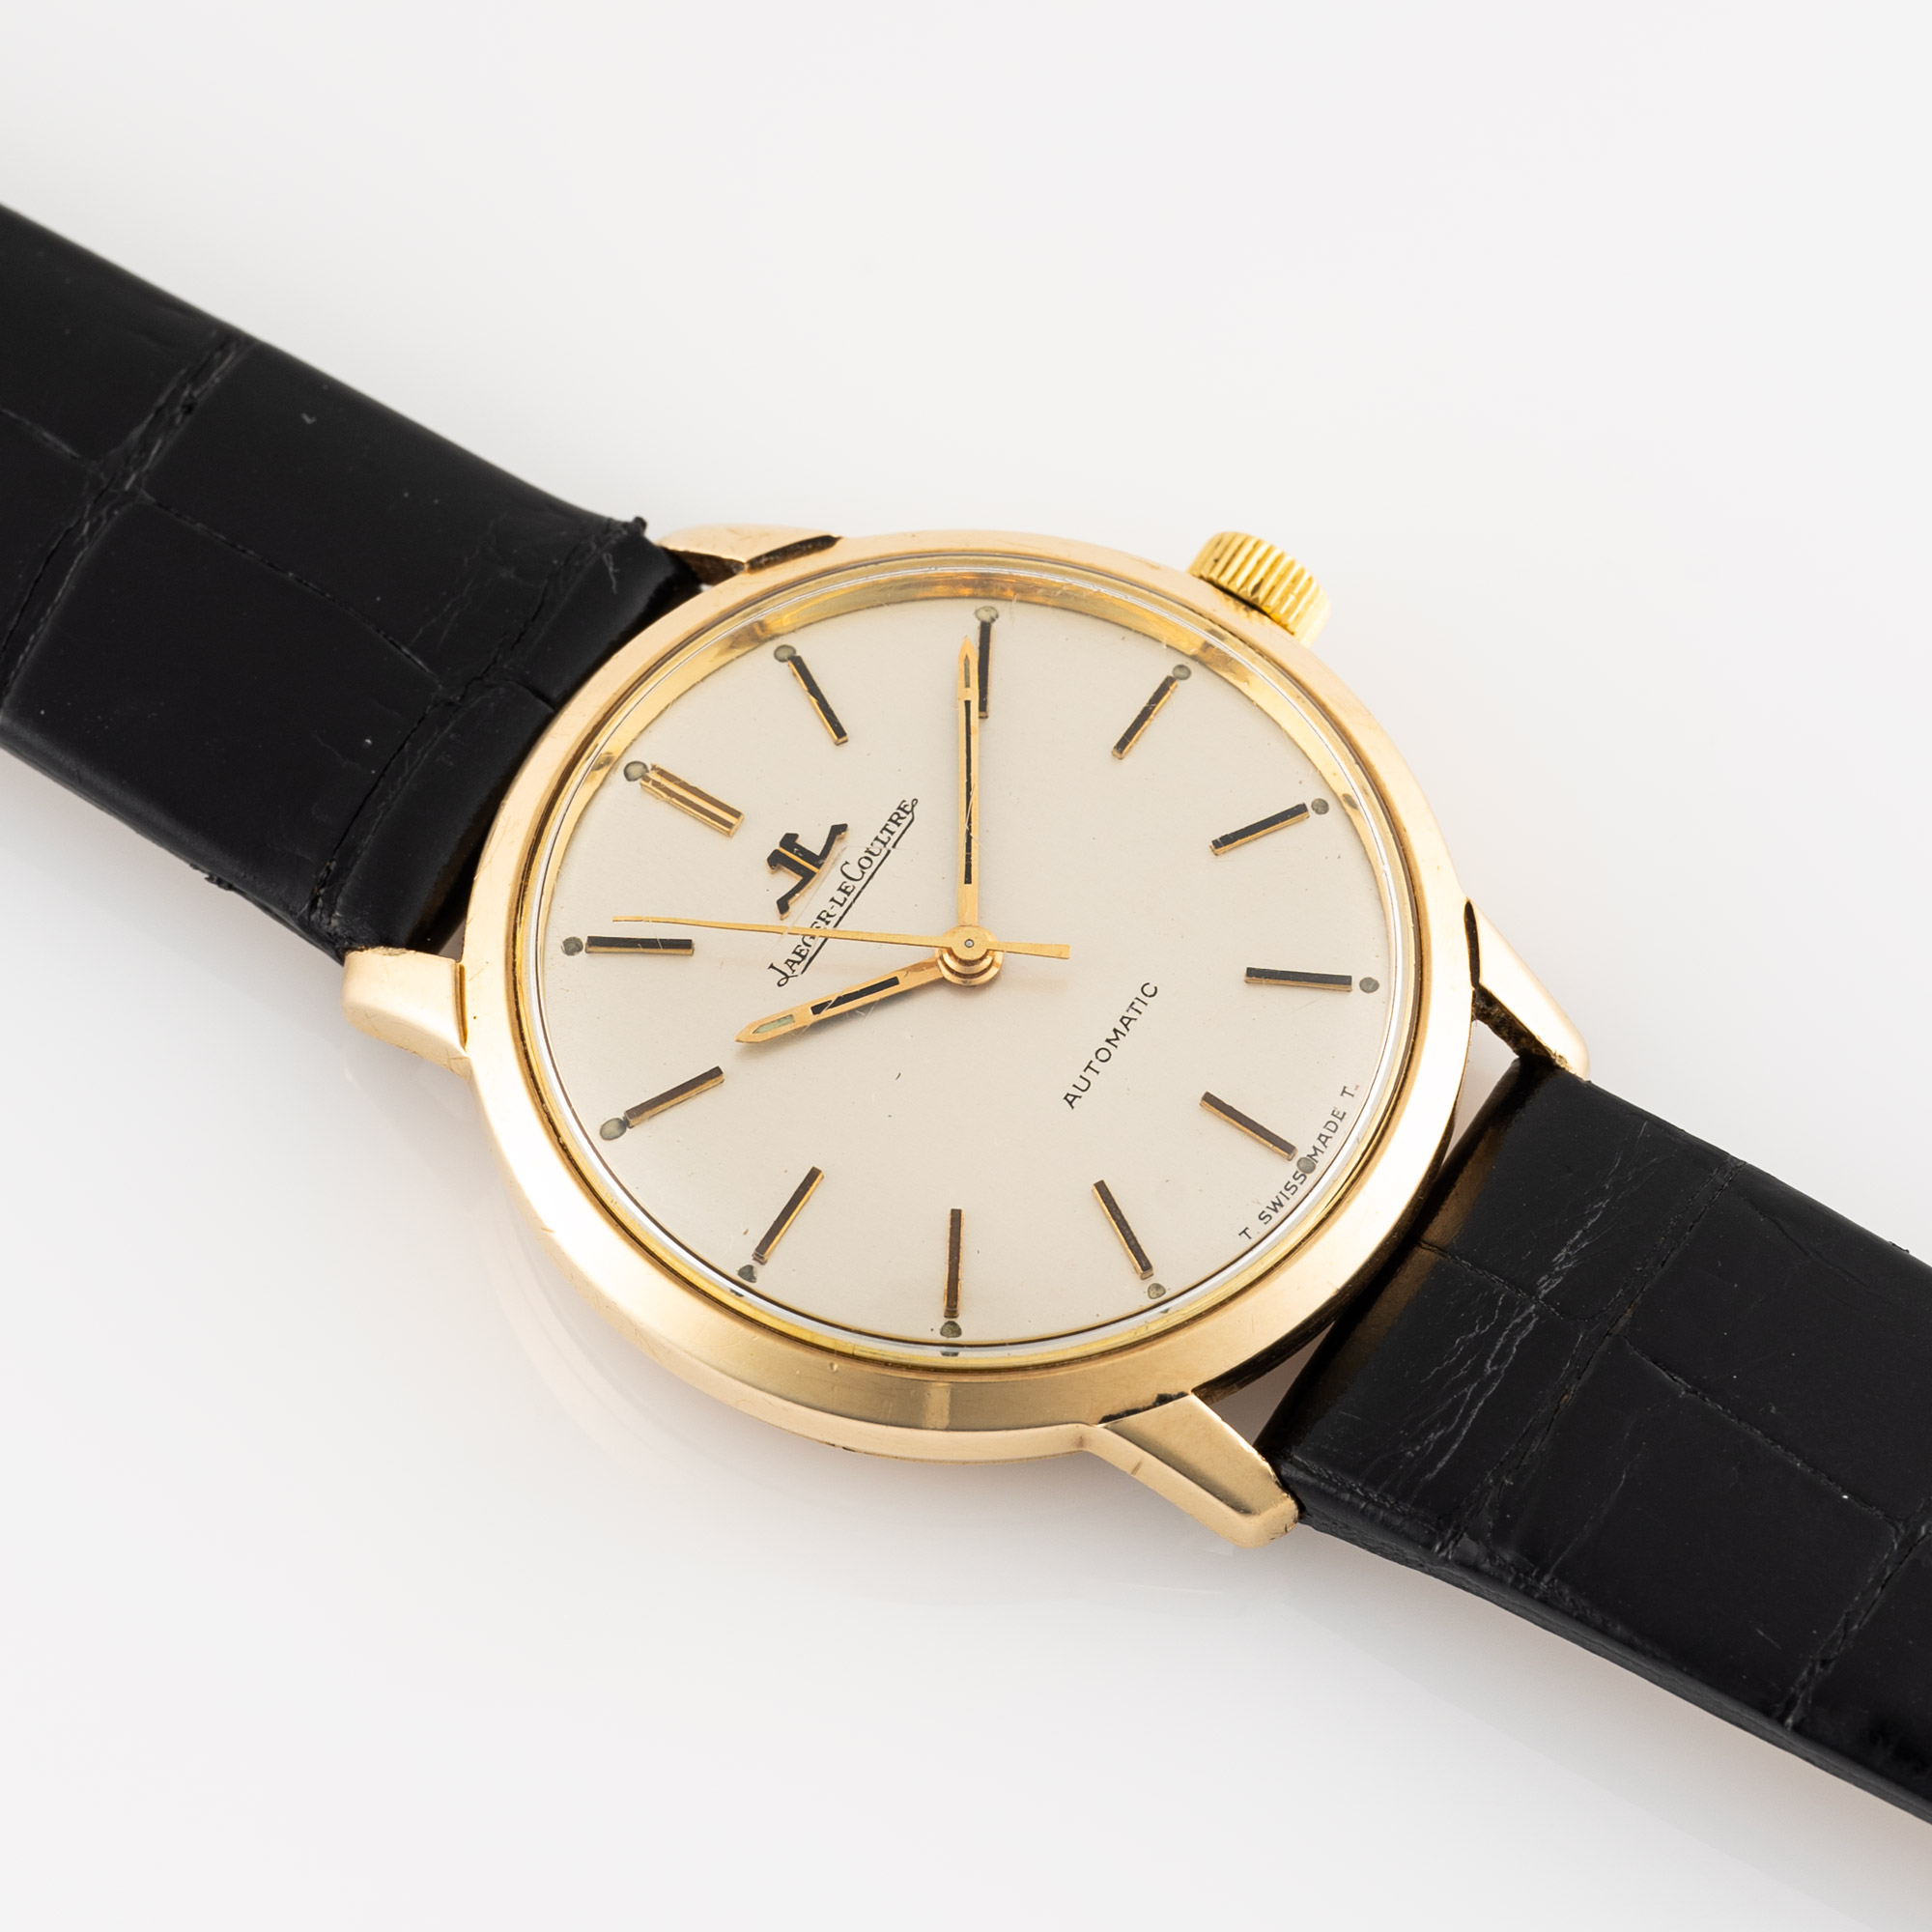 A GENTLEMAN'S SIZE 9CT SOLID GOLD JAEGER LECOULTRE AUTOMATIC WRIST WATCH CIRCA 1960s Movement: - Image 3 of 7